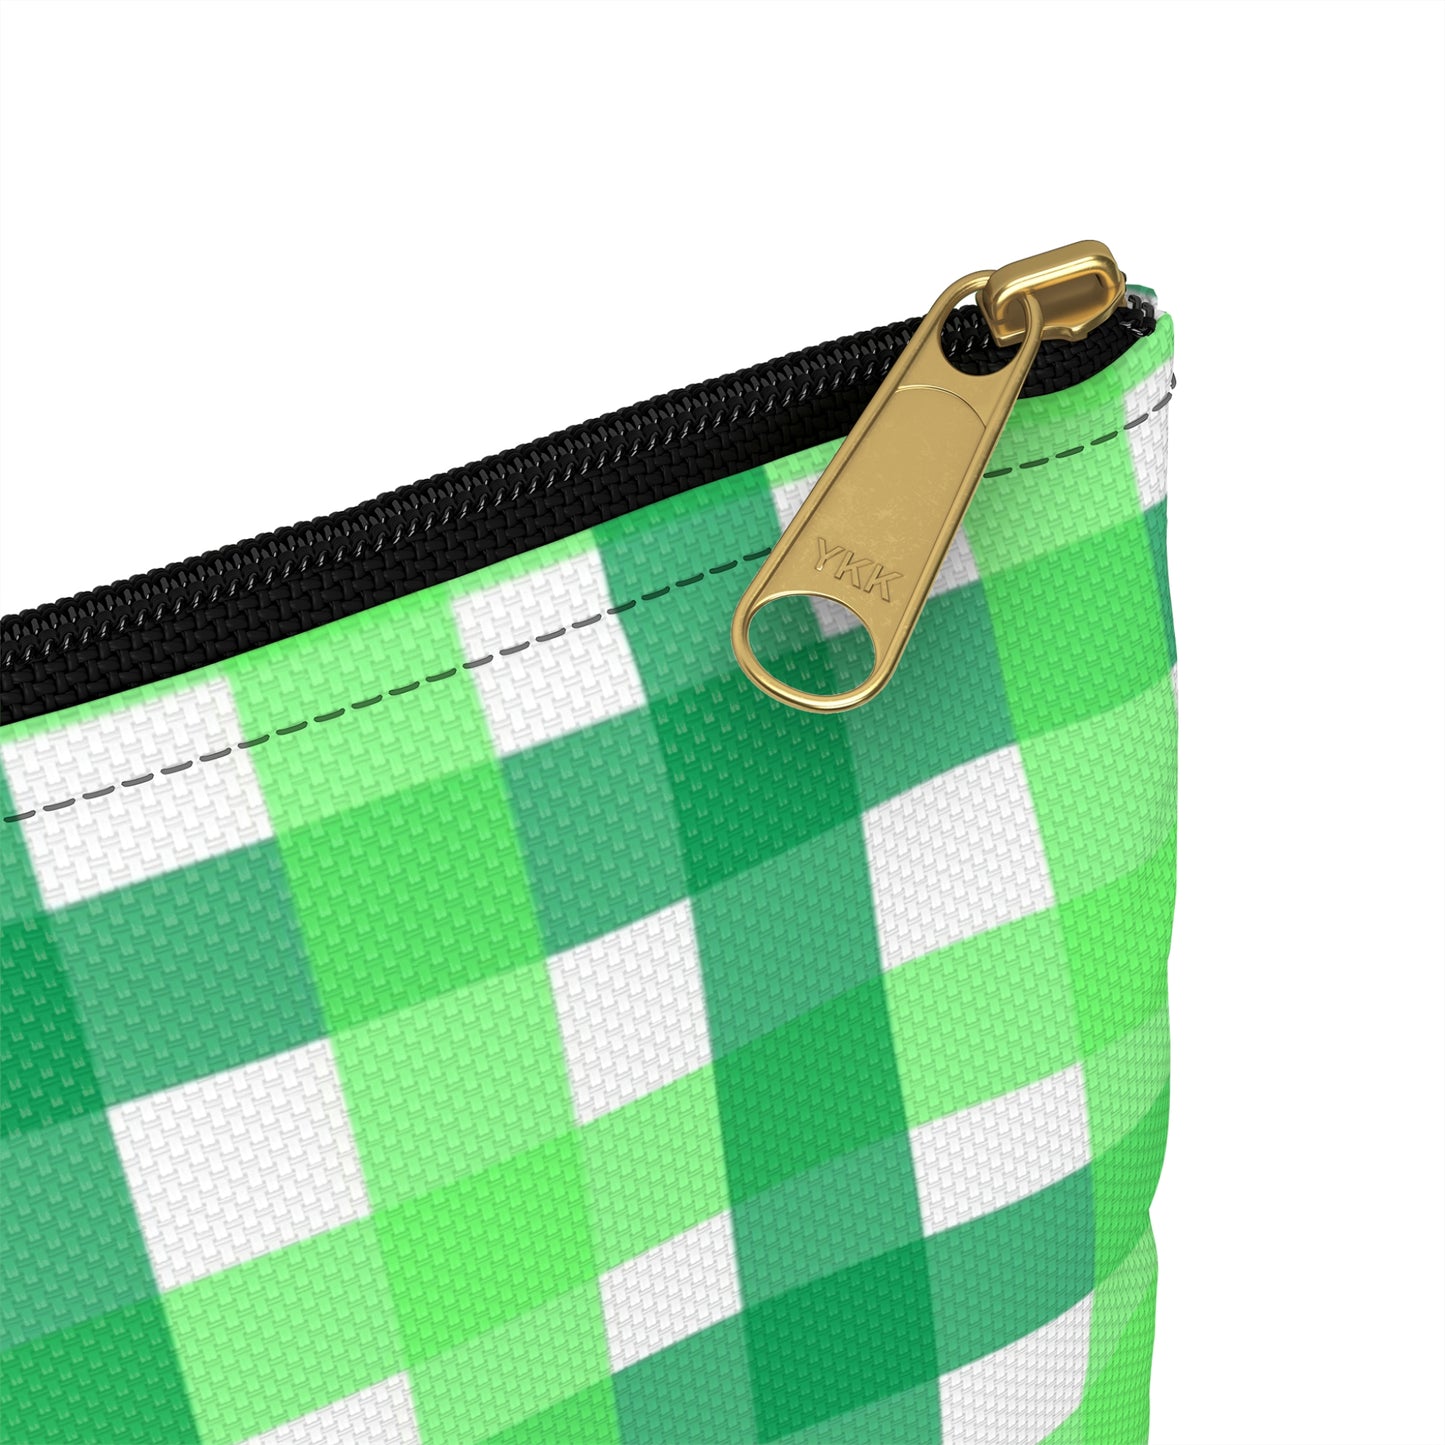 Accessory Pouch Travel Bag Make-up Cosmetic Green Plaid Squares